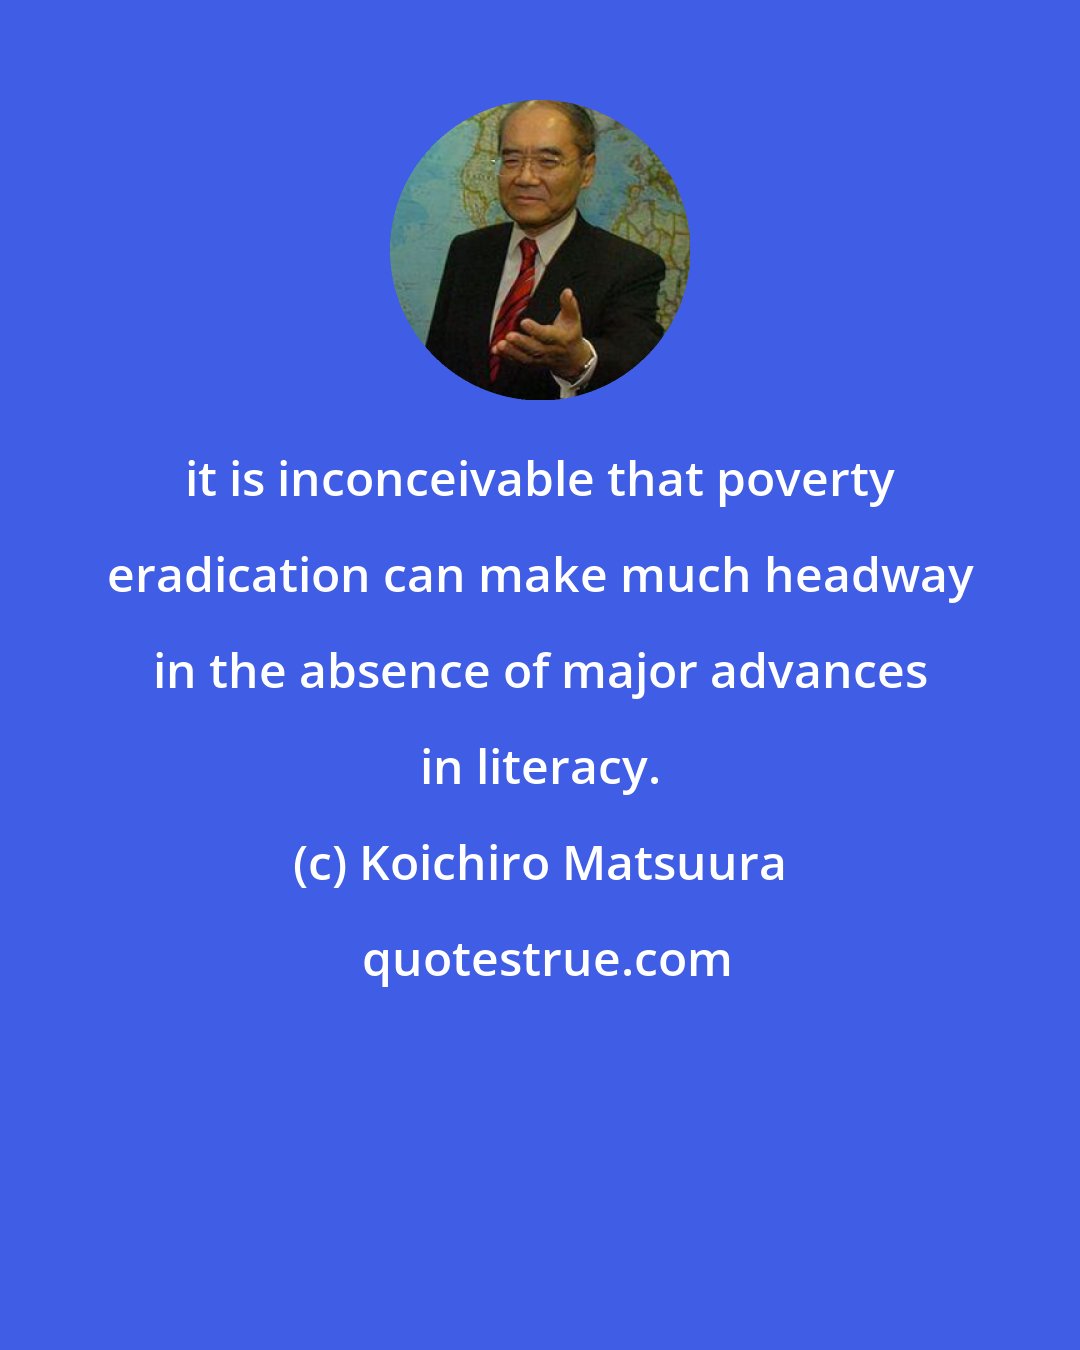 Koichiro Matsuura: it is inconceivable that poverty eradication can make much headway in the absence of major advances in literacy.